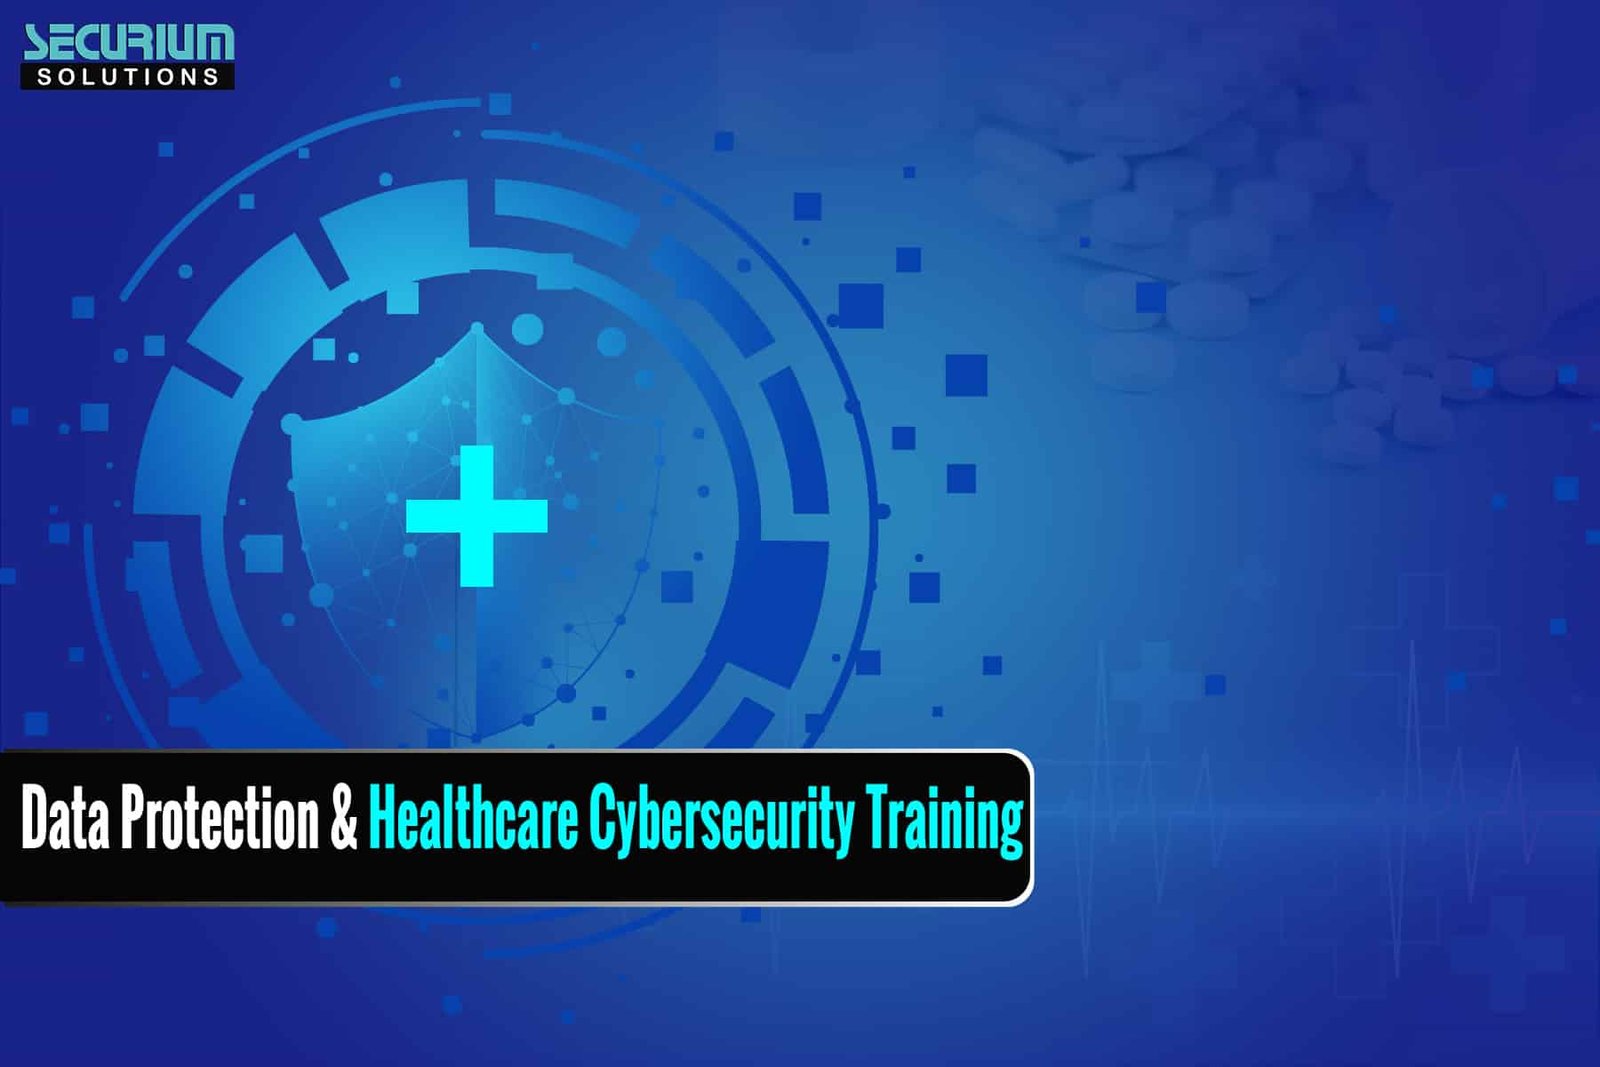 Data protection & healthcare cybersecurity training - Securium solutions